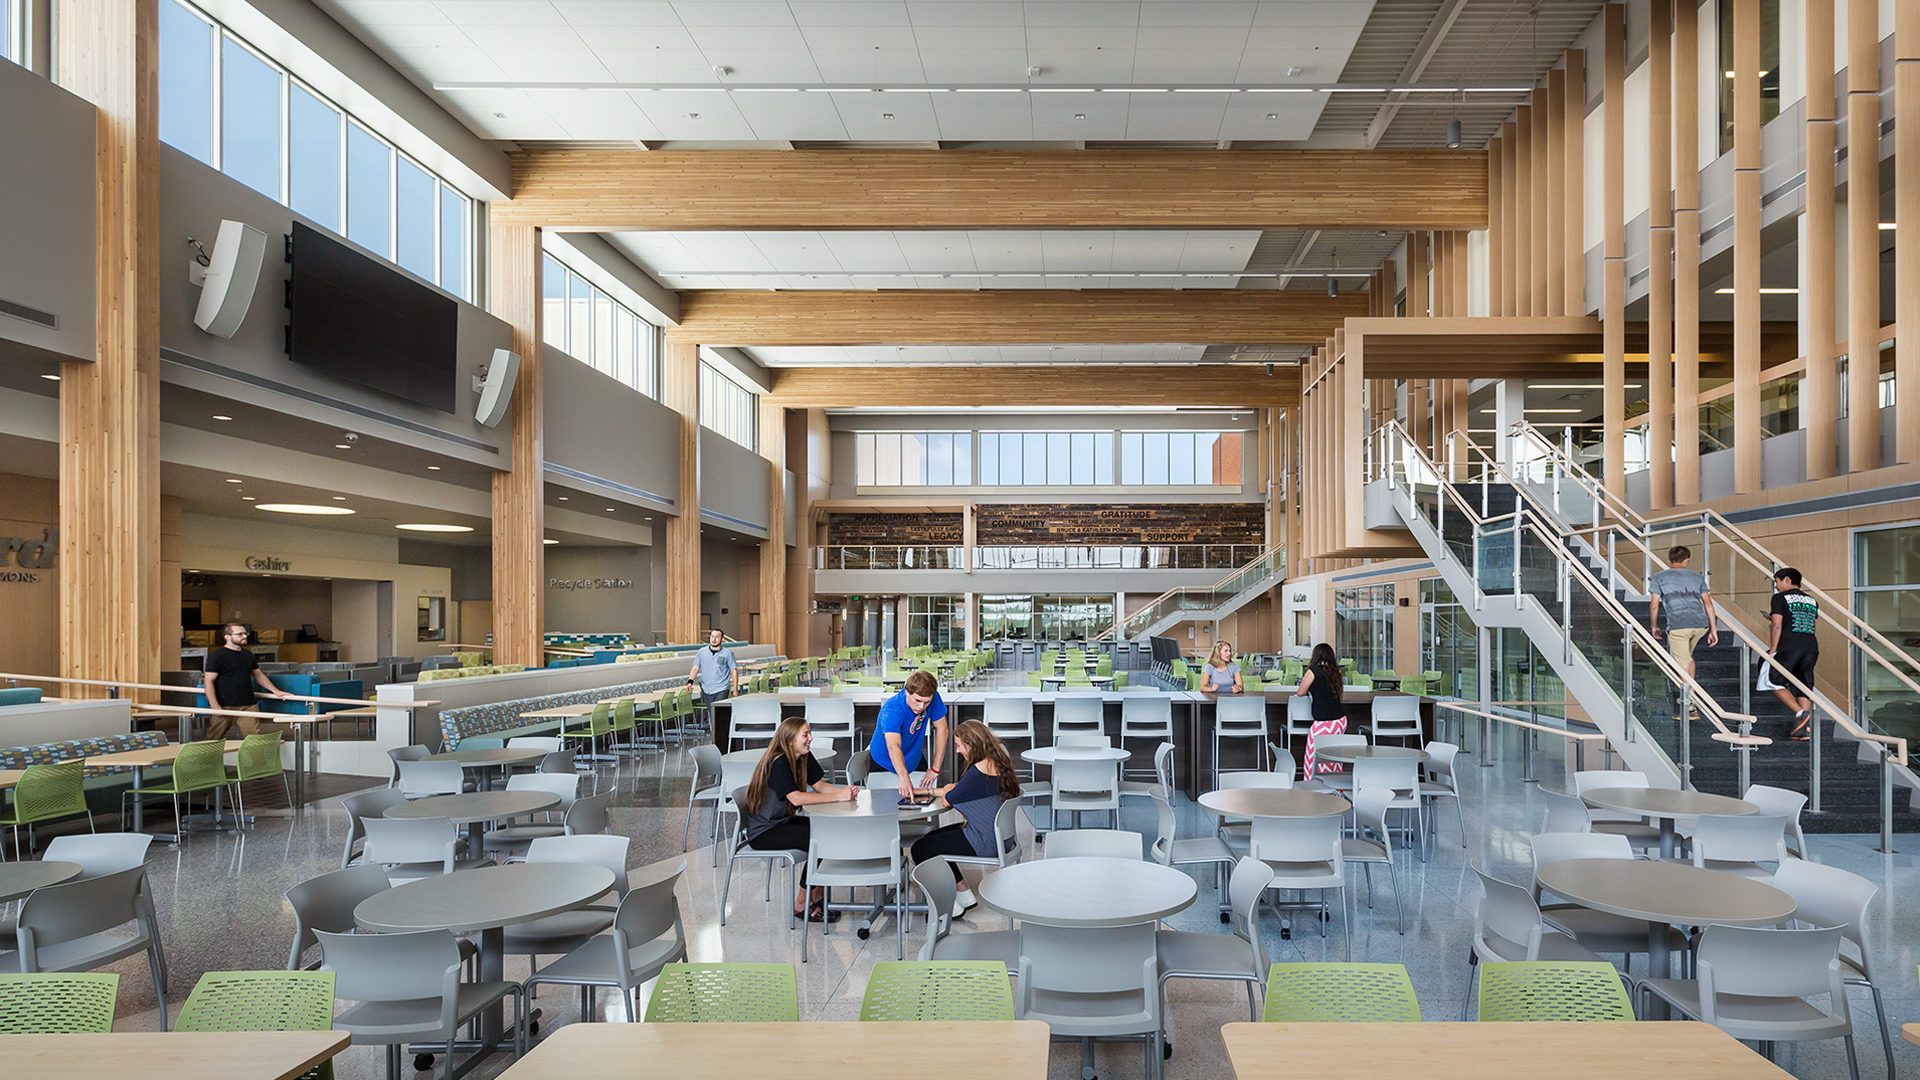 Alexandria High School Interior Cafeteria With Many Tables, Booths and Communal Seating